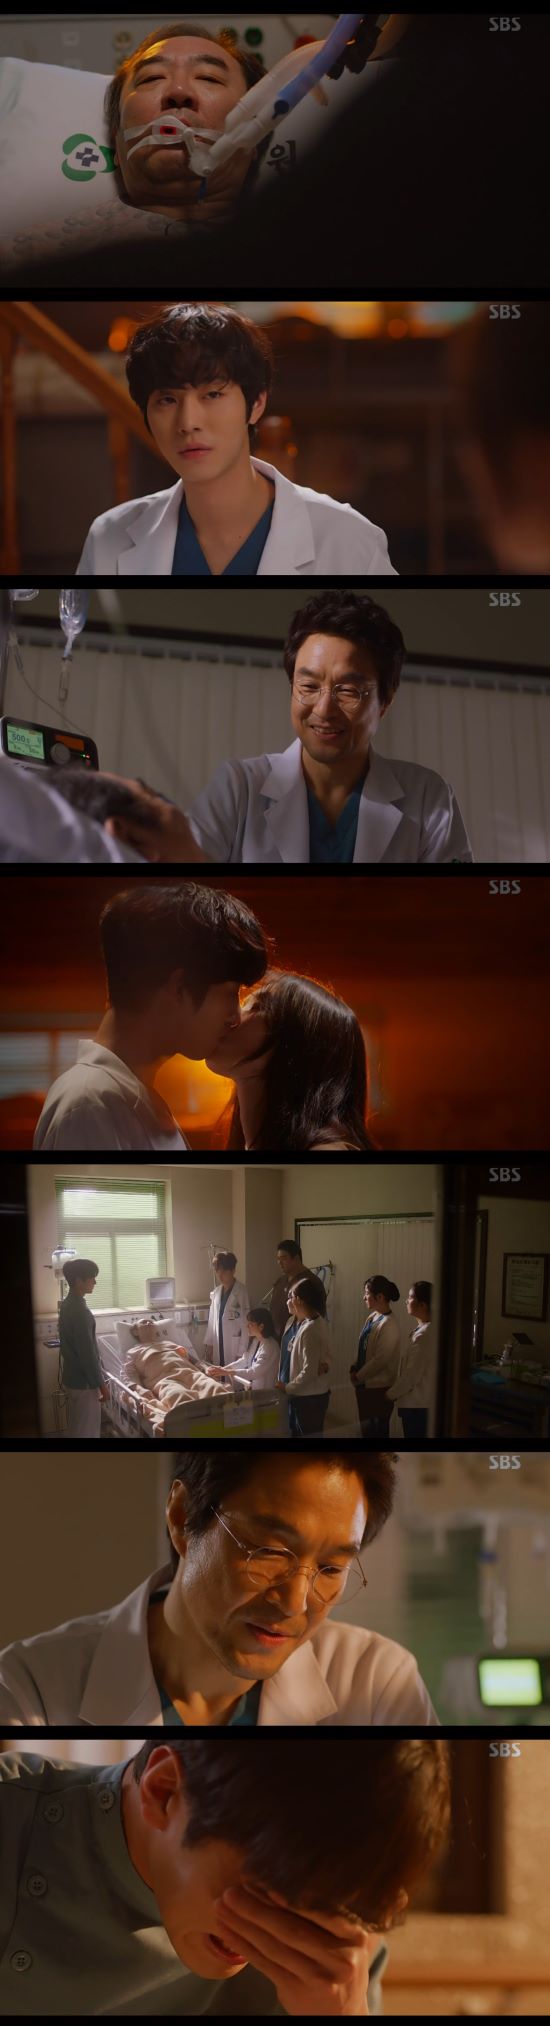 Romantic Doctor Kim Sabu 2 Han Suk-kyu protected Doldam Hospital and welcomed a happy ending.In the final episode of SBS Wolhwa Drama Romantic Doctor Kim Sabu 2 broadcast on the 25th, Kim Sabu established the Doldam Medical Foundation and was shown to fight back against Do Yun-wan (Choi Jin-ho).The condition of Still Operating (Kim Hong-pa) deteriorated on the day; Kim Sa-bu quickly conducted first aid; after one go-ahead, Kim Sa-bu said, Im sorry.I did not keep my promise. Still operating told Kim Sabu, I live as a providence and go to the providence.Just as I respected my life, please respect death. Cha Eun-jae (Lee Sung-kyung) was told to come up to the main building, so Cha Eun-jae visited Kim Sabu to inform him of the fact.Do you not need me?Kim said, If you want me to hold you, I will not do it. I should not intervene in the problem of your doctors life.He then told me about the benefits of going to the main house. You will do well anywhere.Do not doubt yourself whatever you choose. When Seo Woo Jin (Ahn Hyo-seop), who heard about Cha Eun-jaes return to his home office, was confused; after that, when Seo Woo Jin was chilly, Cha Eun-jae said, Why dont you hold me?I have already lost that presence to you. Seo Woo Jin replied, I was afraid. I would lose you. Cha said, Do you want to hold me? If you regret it later, you will tell me. Reset. So they confirmed each others minds.Later, the dignity of Still Operating was carried out; Kim Sabu removed all the devices that were up to Still Operating.Still operating said, Im sorry for you, but its a great thank you and a happy thing for me. He said, Everyone is good.And I hope you achieve the trauma center. Kim said, I will see you later. After leaving Still Operating, Seo Woo Jin told Kim that he had solved his homework and that he was suffering from multiple sclerosis.He asked, Why did you give yourself homework?Kim said, In the file, all the emergency surgeries and treatments have been piled up since I entered Doldam Hospital. In the meantime, the only way to reduce mistakes as a doctor is performance and experience.Everything we have covered is being stored as a mono stone project. So Seo Woo Jin asked, Why did I build so hard? Kim said, You are one of the strange stones.Kim also visited Park Min-guk (Kim Joo-heon), who left his resignation letter, saying, If I operate, I will not be able to perform surgery for three weeks.I want you to do the surgery during that period. When Park Min-guk refused to say that it was not related to me, Kim said, Are you running again?I can not escape from anywhere for the rest of my life, he added. Please think about it once as the same doctor.Then, Kim Sabus surgery was carried out. At this time, all the organs were changed from side to side.Park Min-guk immediately went to the house, recalling what Kim Sabu had said earlier.Kims surgery was successfully completed. Then he told Park Min-guk, Lets go together.You and me, the crooked swordsmen, who are confidently saving people, are the constitution of saving people. Park Min-guk said, If I stay here, I want to make it a regional trauma center within three years. Kim Sabu also agreed that the sea I want.At that time, Doyun Wan, who came to the hospital, pointed out the wrist problem to Kim Sabu and declared, I will erase this stone wall hospital with you.Kim Sabu handed the permission to establish a medical corporation to Do Yoon-wan.Now it has become a completely independent corporation with the giant foundation, he said. It is a will left by Shin Byung-ho (Ju-hyun), the late president.When his plan collapsed, Do Yoon-wan cried, and then he heard that emergency patients would be brought in. The family members of Doldam Hospital moved as busy as they always did.This is the people who are doctors. Cha Eun-jae returned to Doldam Hospital after that.Photo: SBS broadcast screen